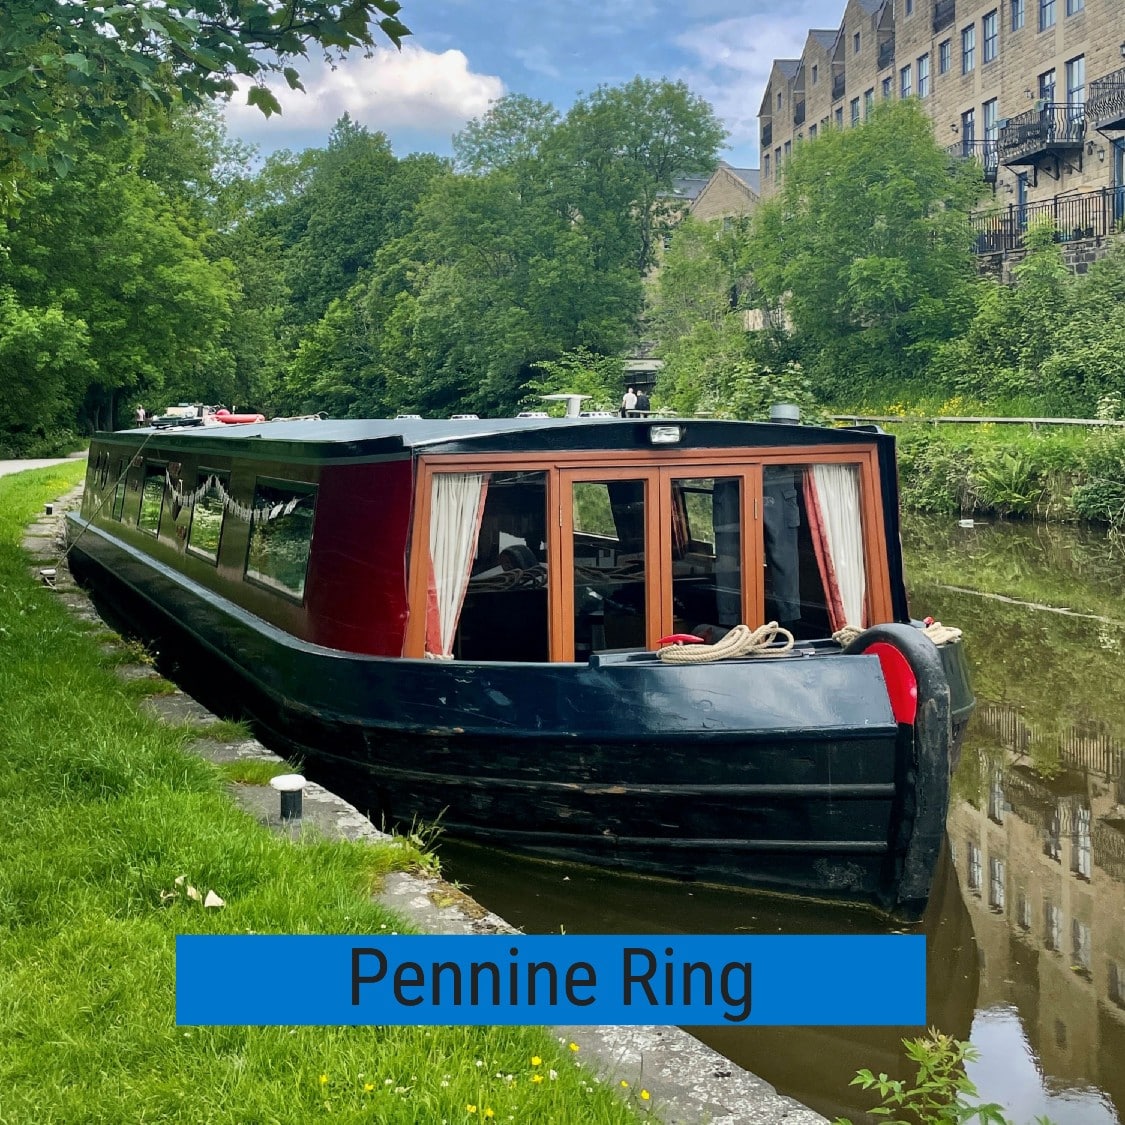 Cruise the Pennine Ring on canal boat holiday